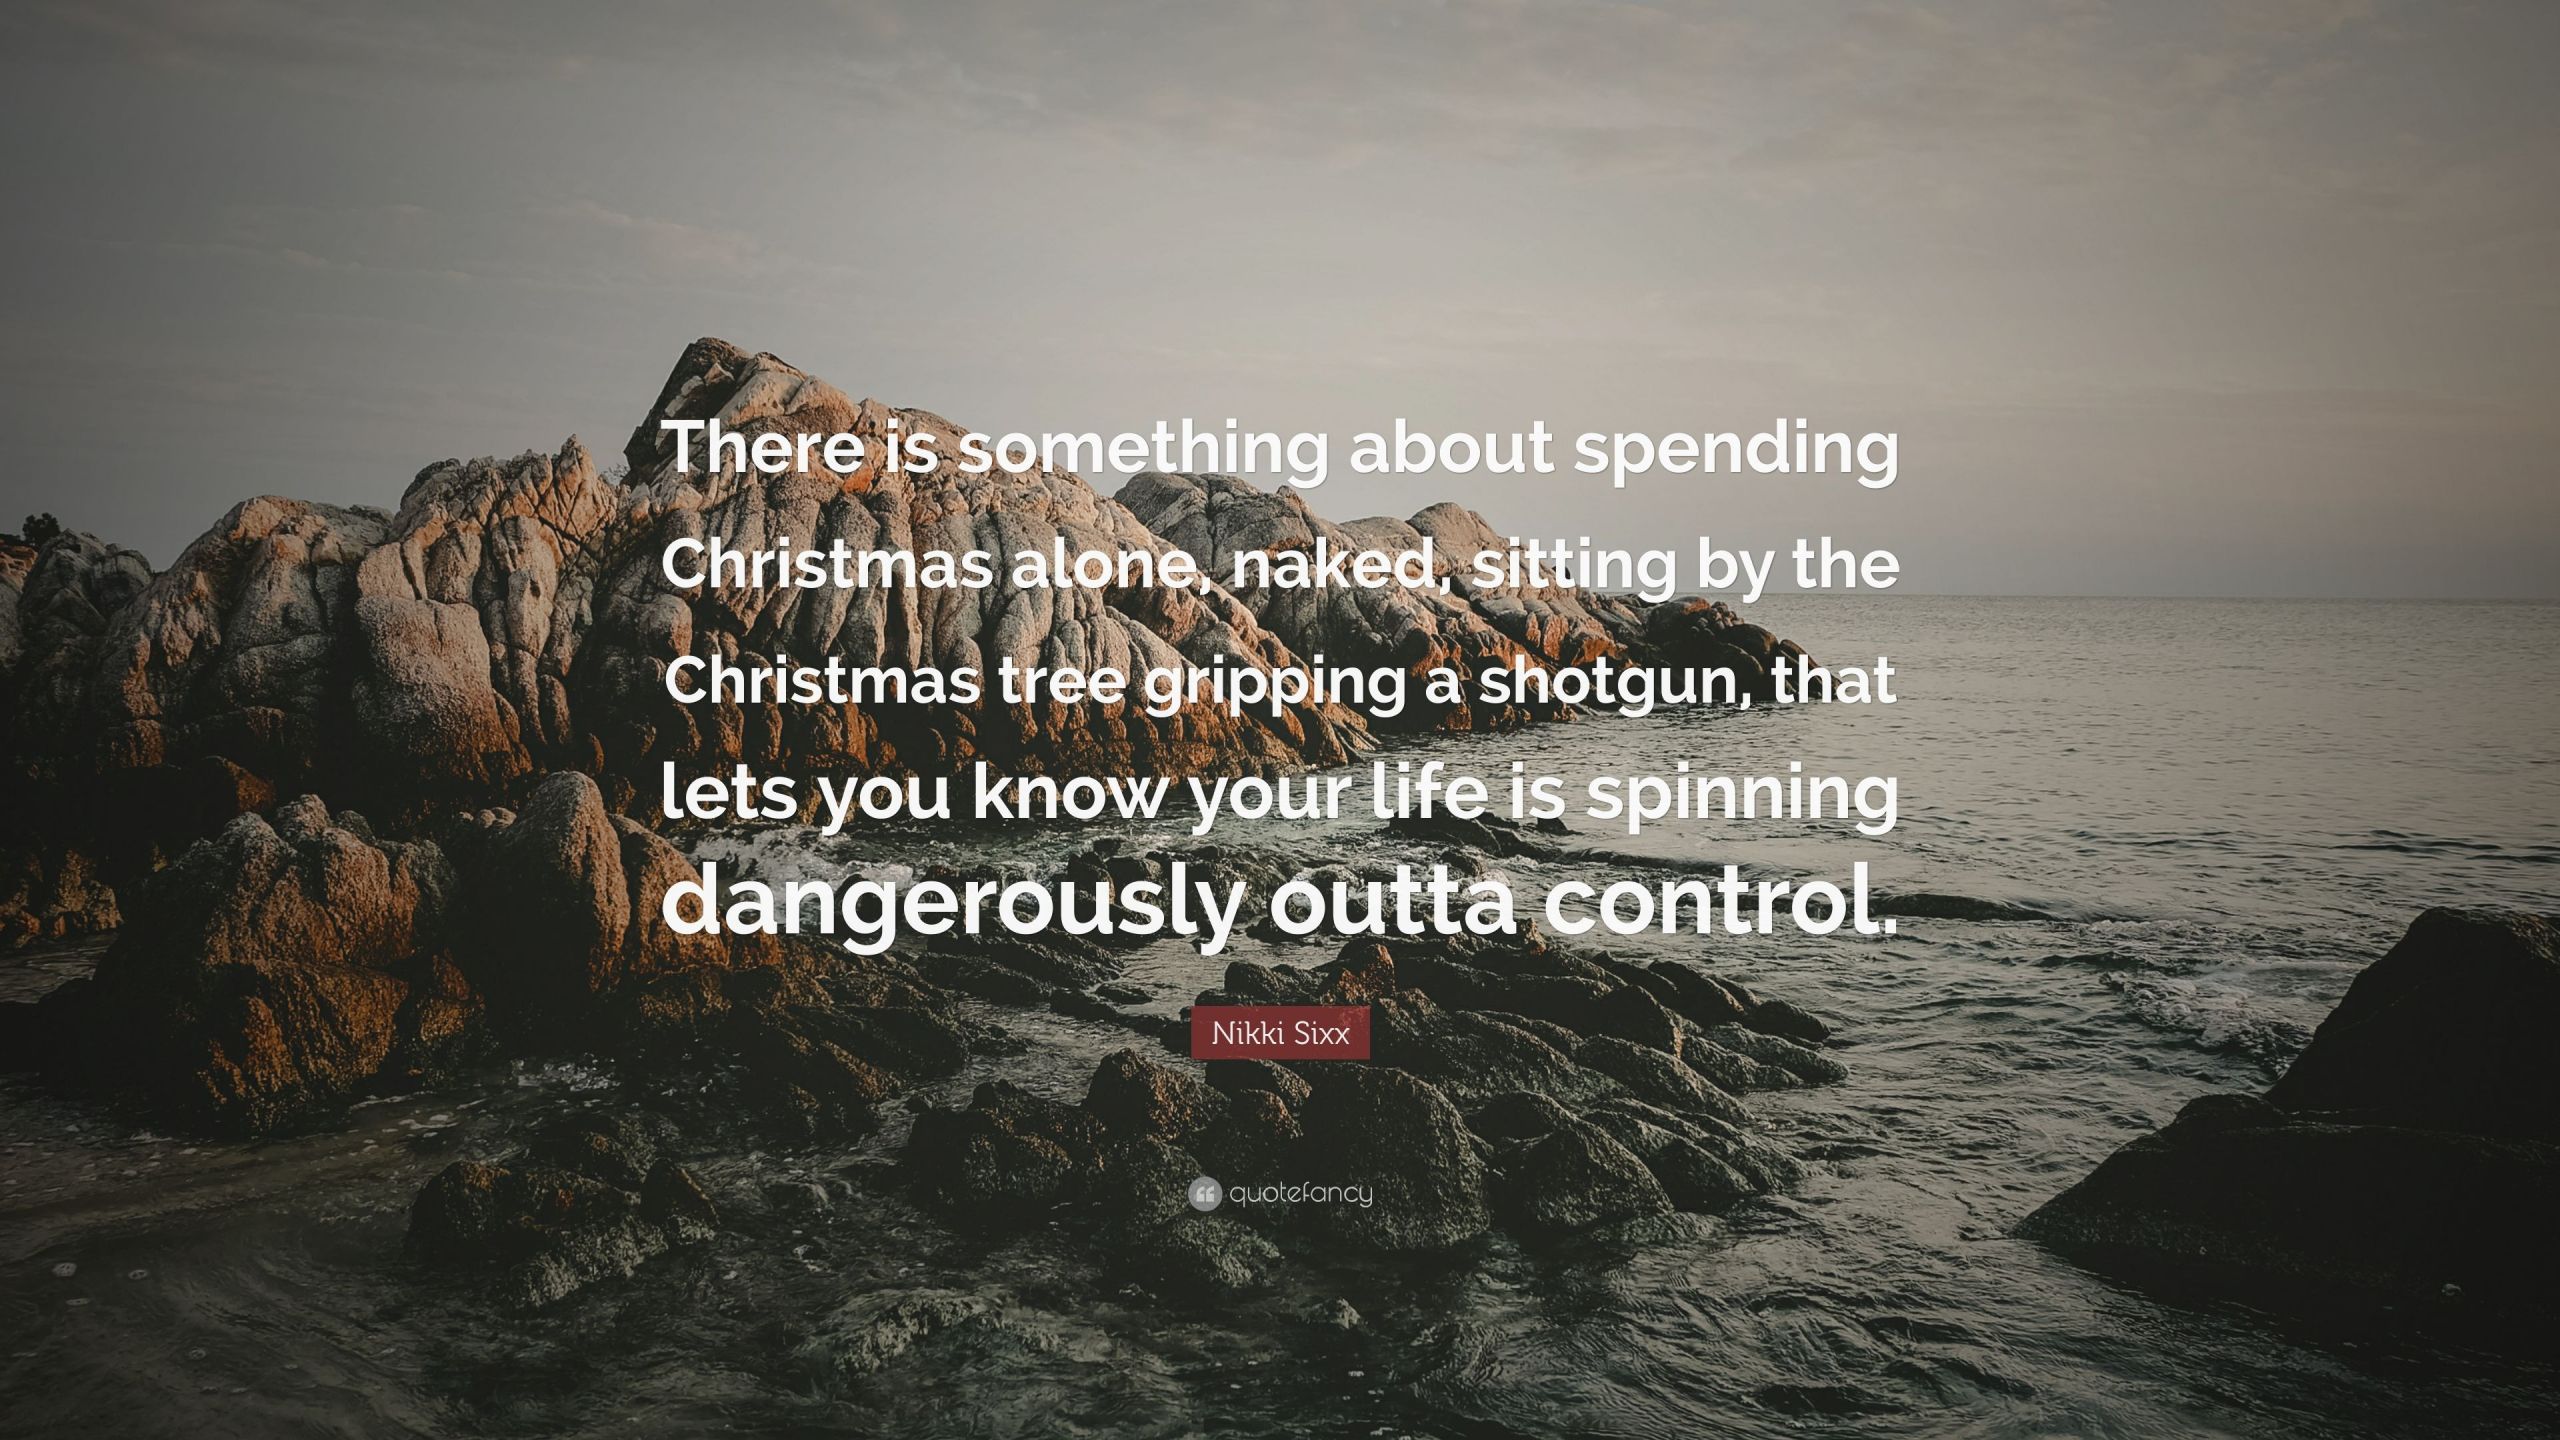 Christmas Alone Quotes
 Nikki Sixx Quote “There is something about spending